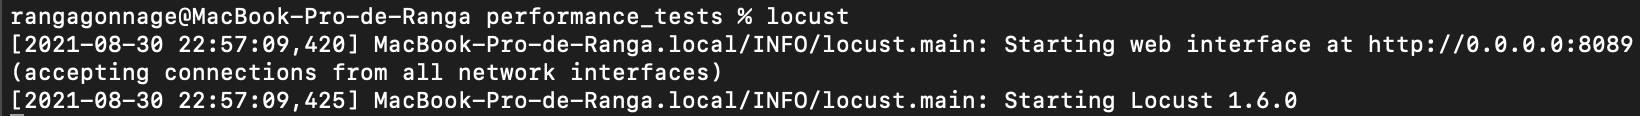 Use the locust command to run the server with the locustfile.py file in the current directory.